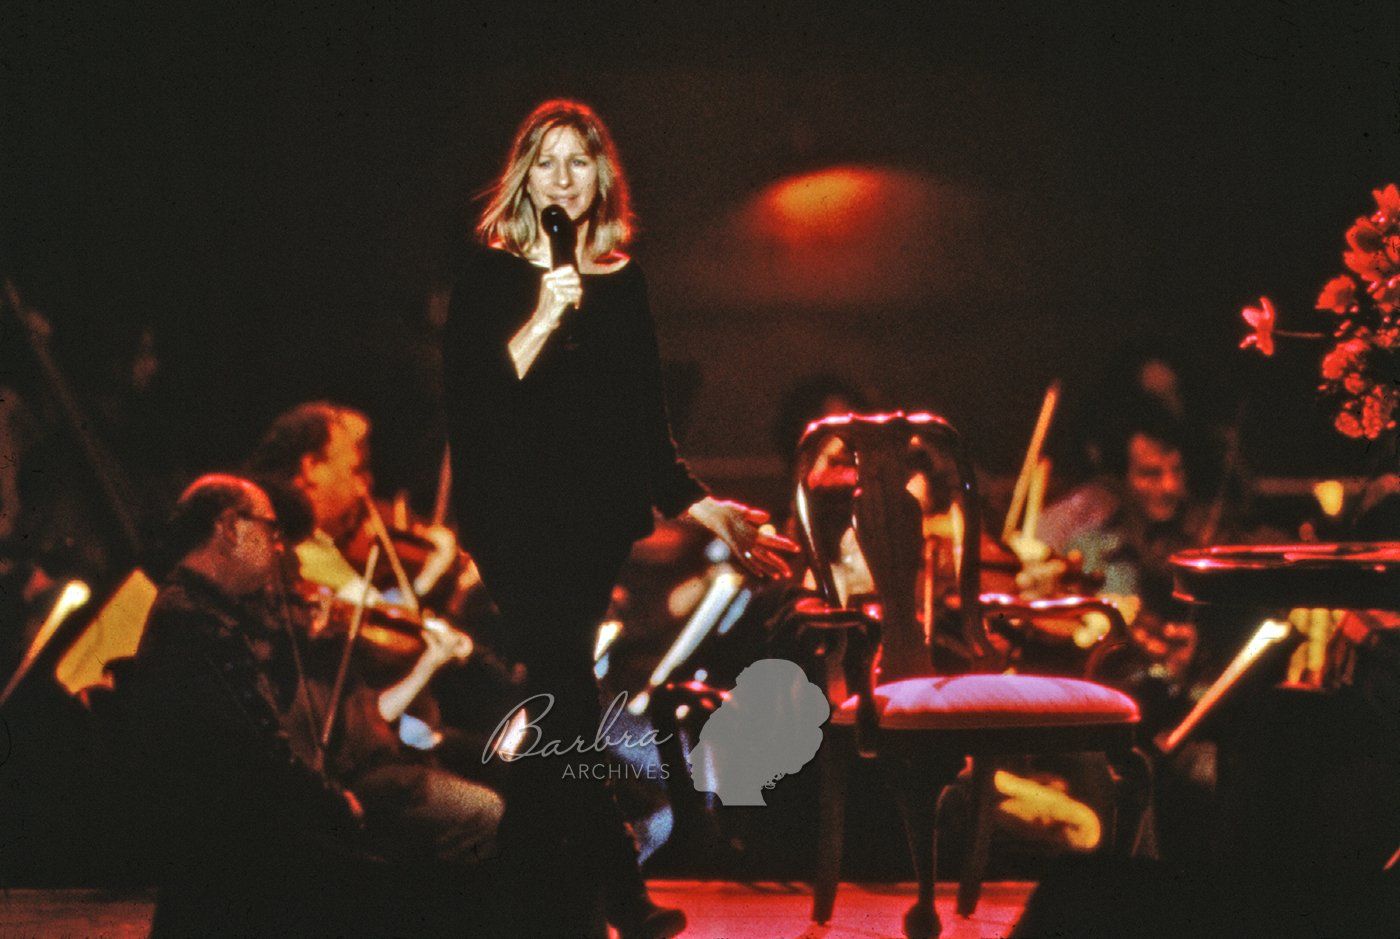 Another photo of Streisand in her rehearsal clothes, rehearsing the MGM Grand concert